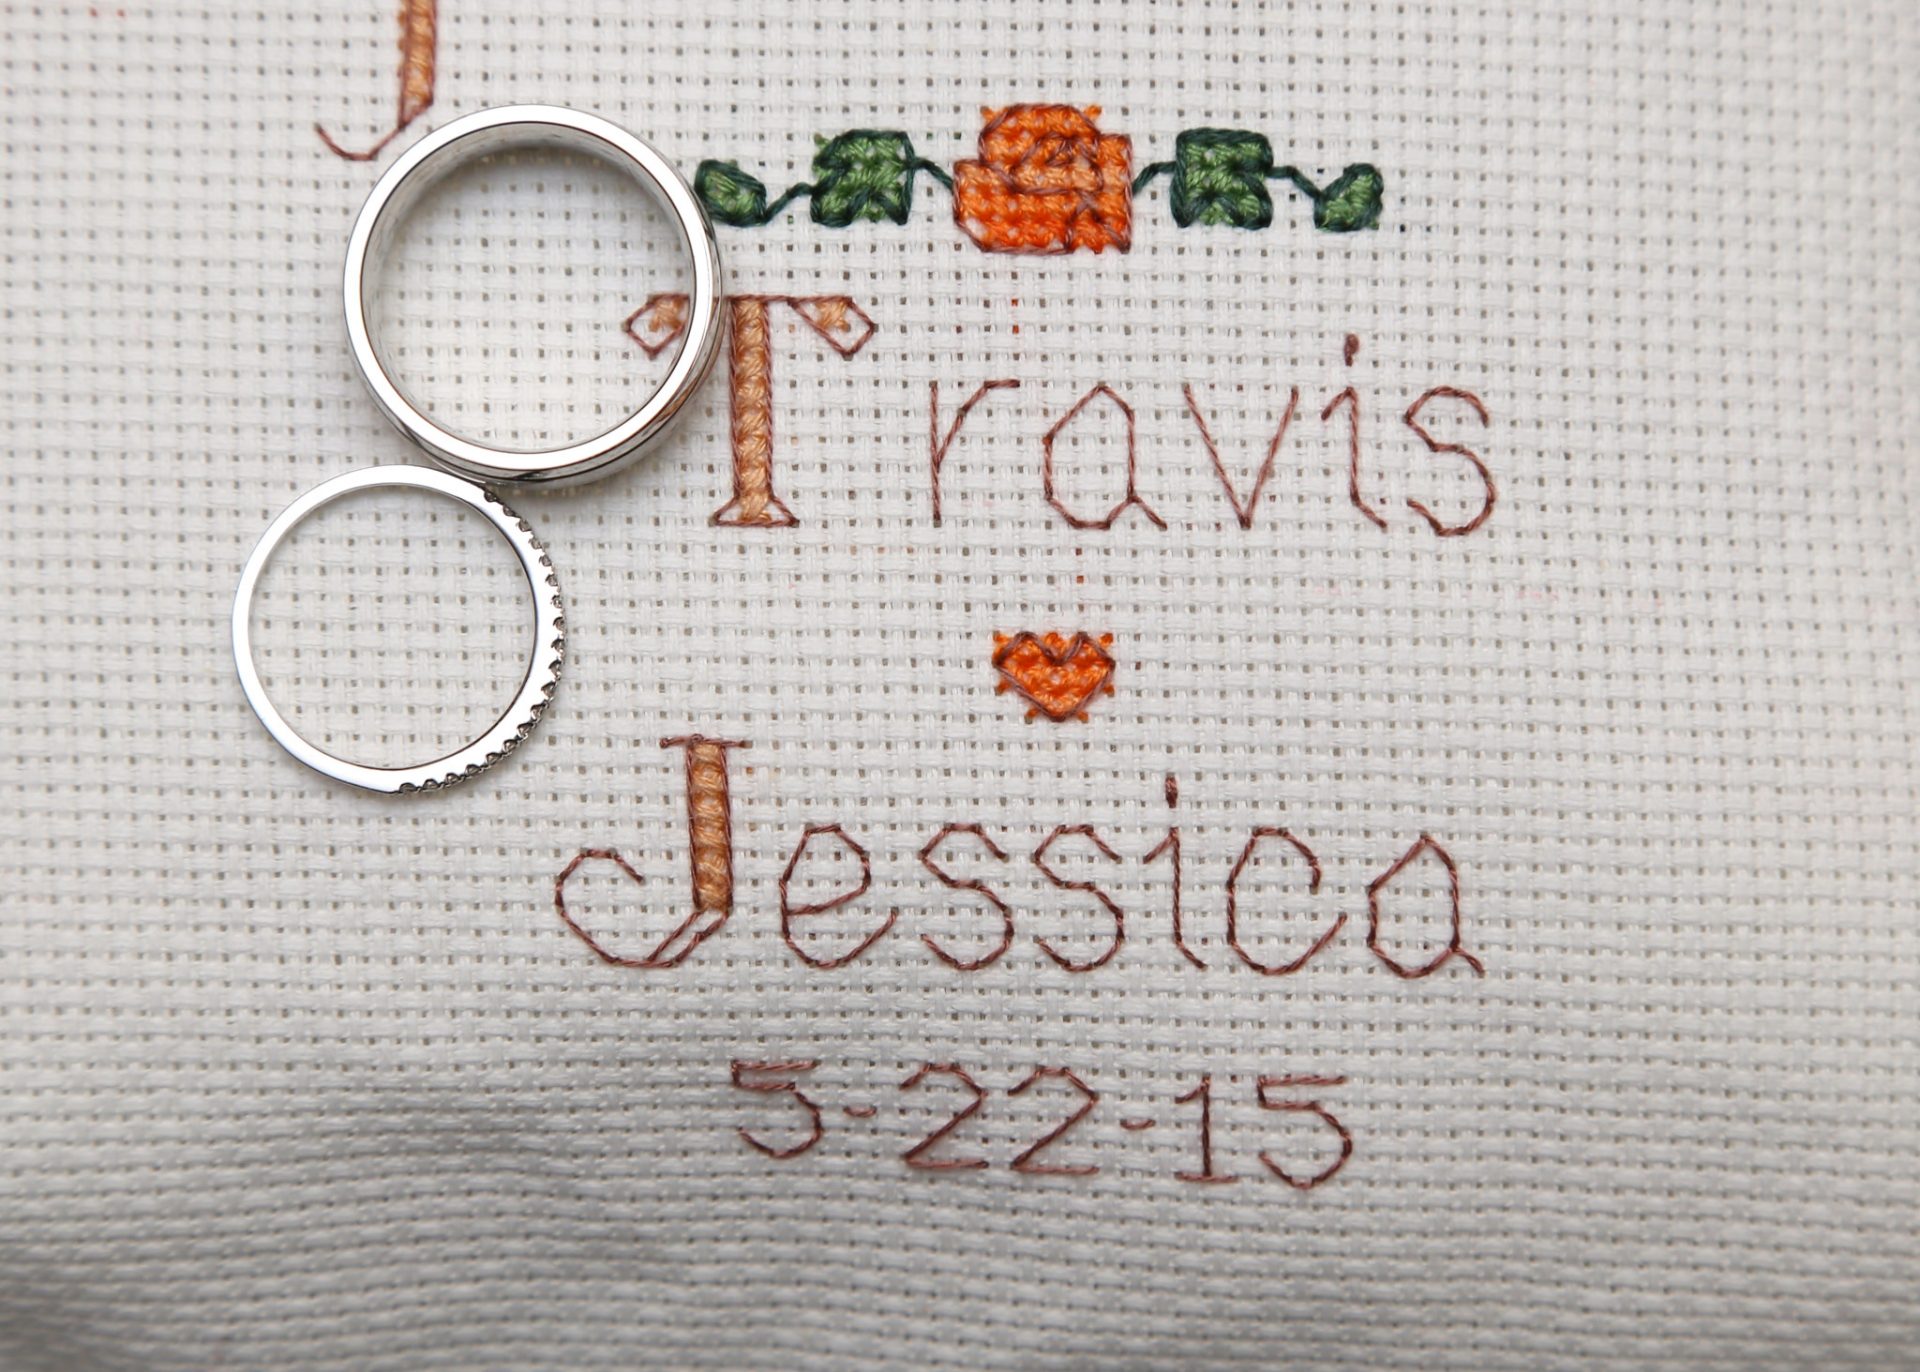 hand made wedding gift of cross stitched pillow with name of bride and groom and date of wedding